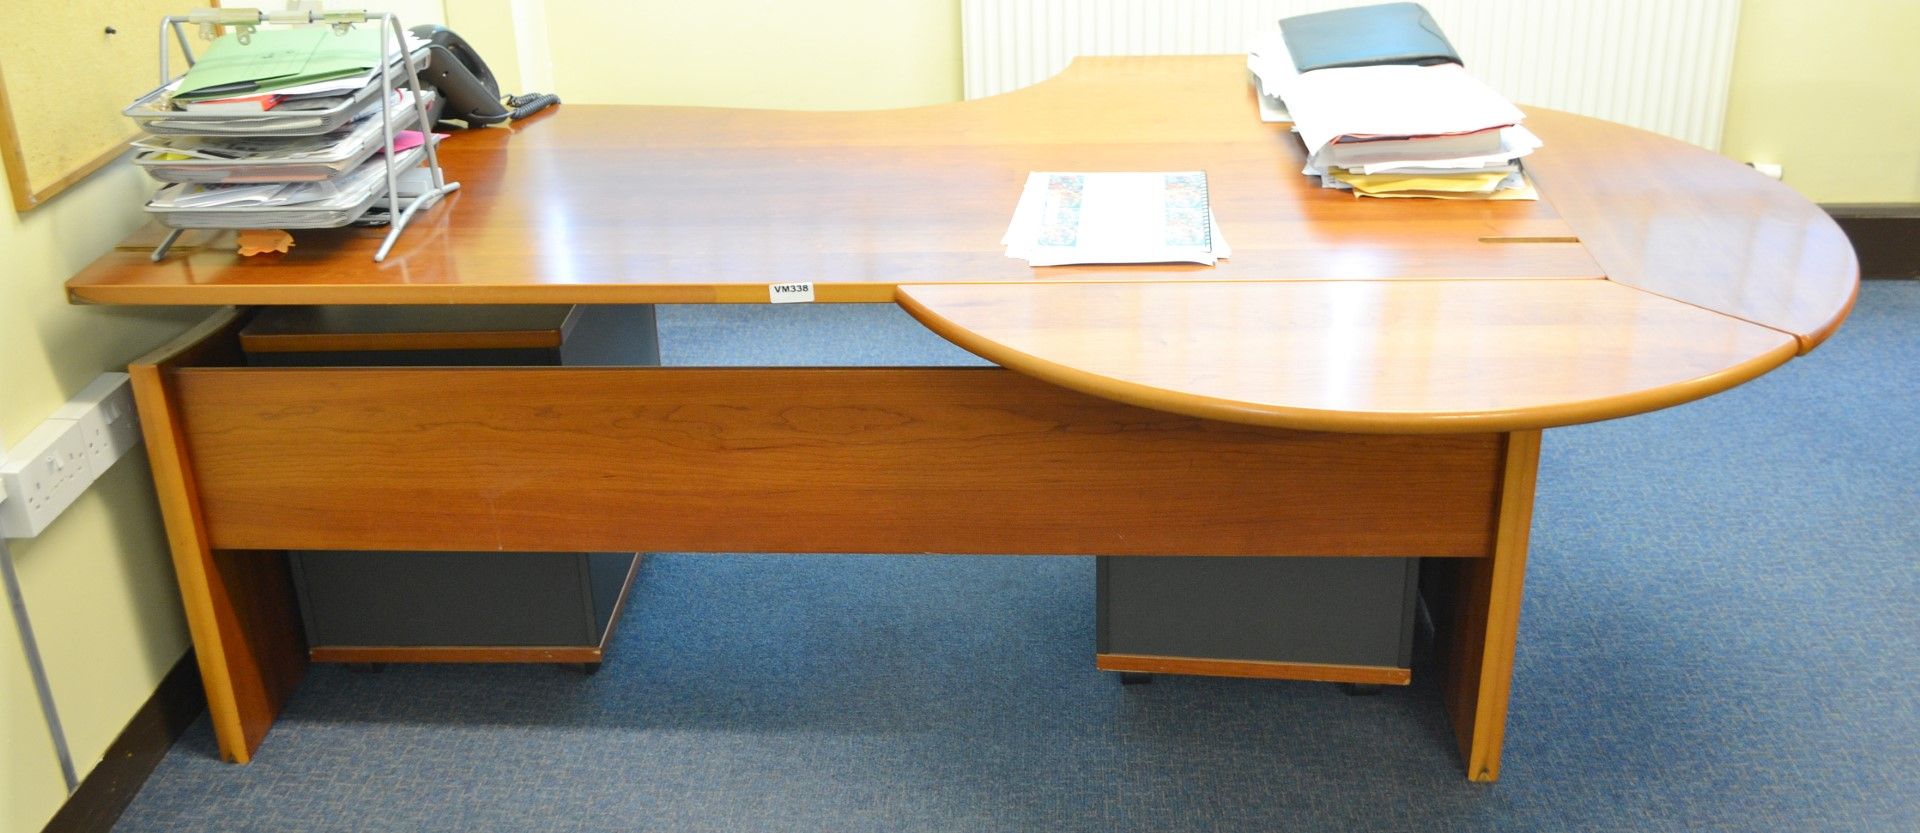 1 x Large Walnut Desk With 2 x Integrated Undercounter Pedestal's - VM338/A29 - CL409 - Location: - Image 2 of 3